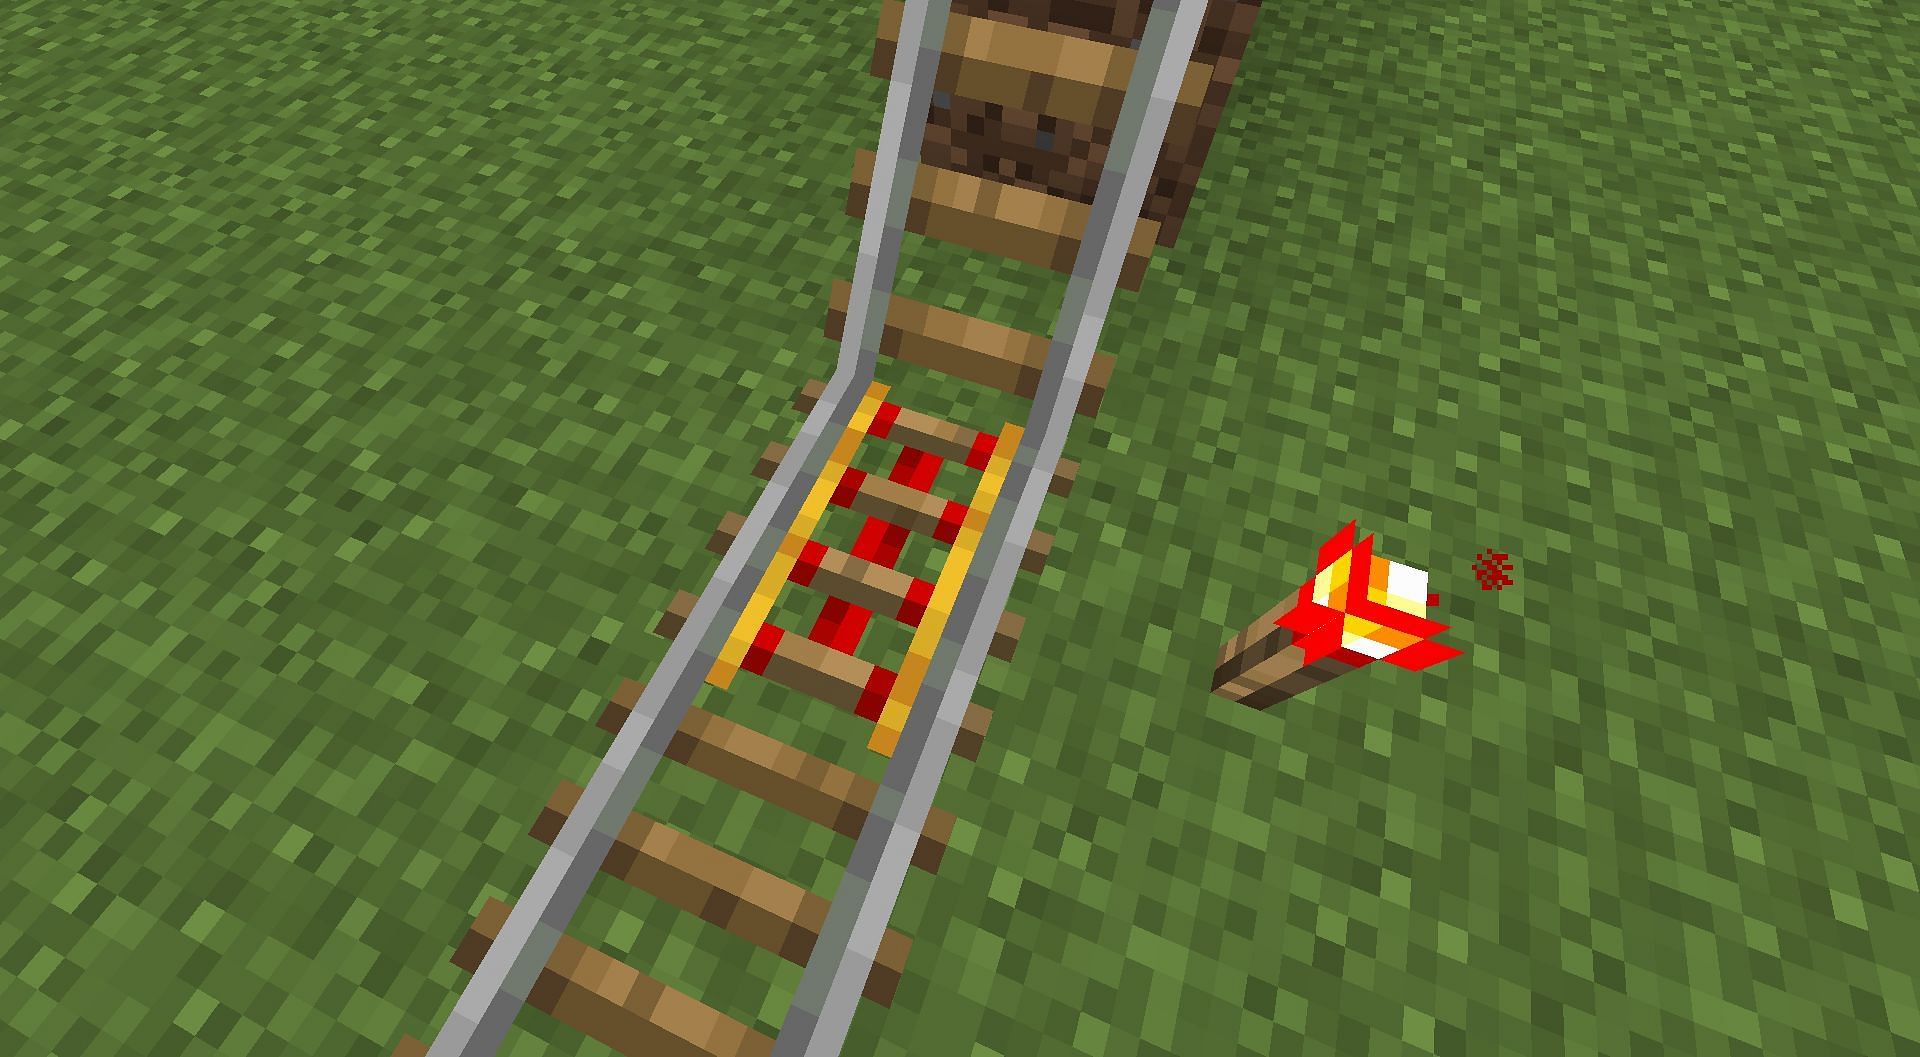 The redstone torch sends a signal to other redstone components in Minecraft (Image via Mojang)